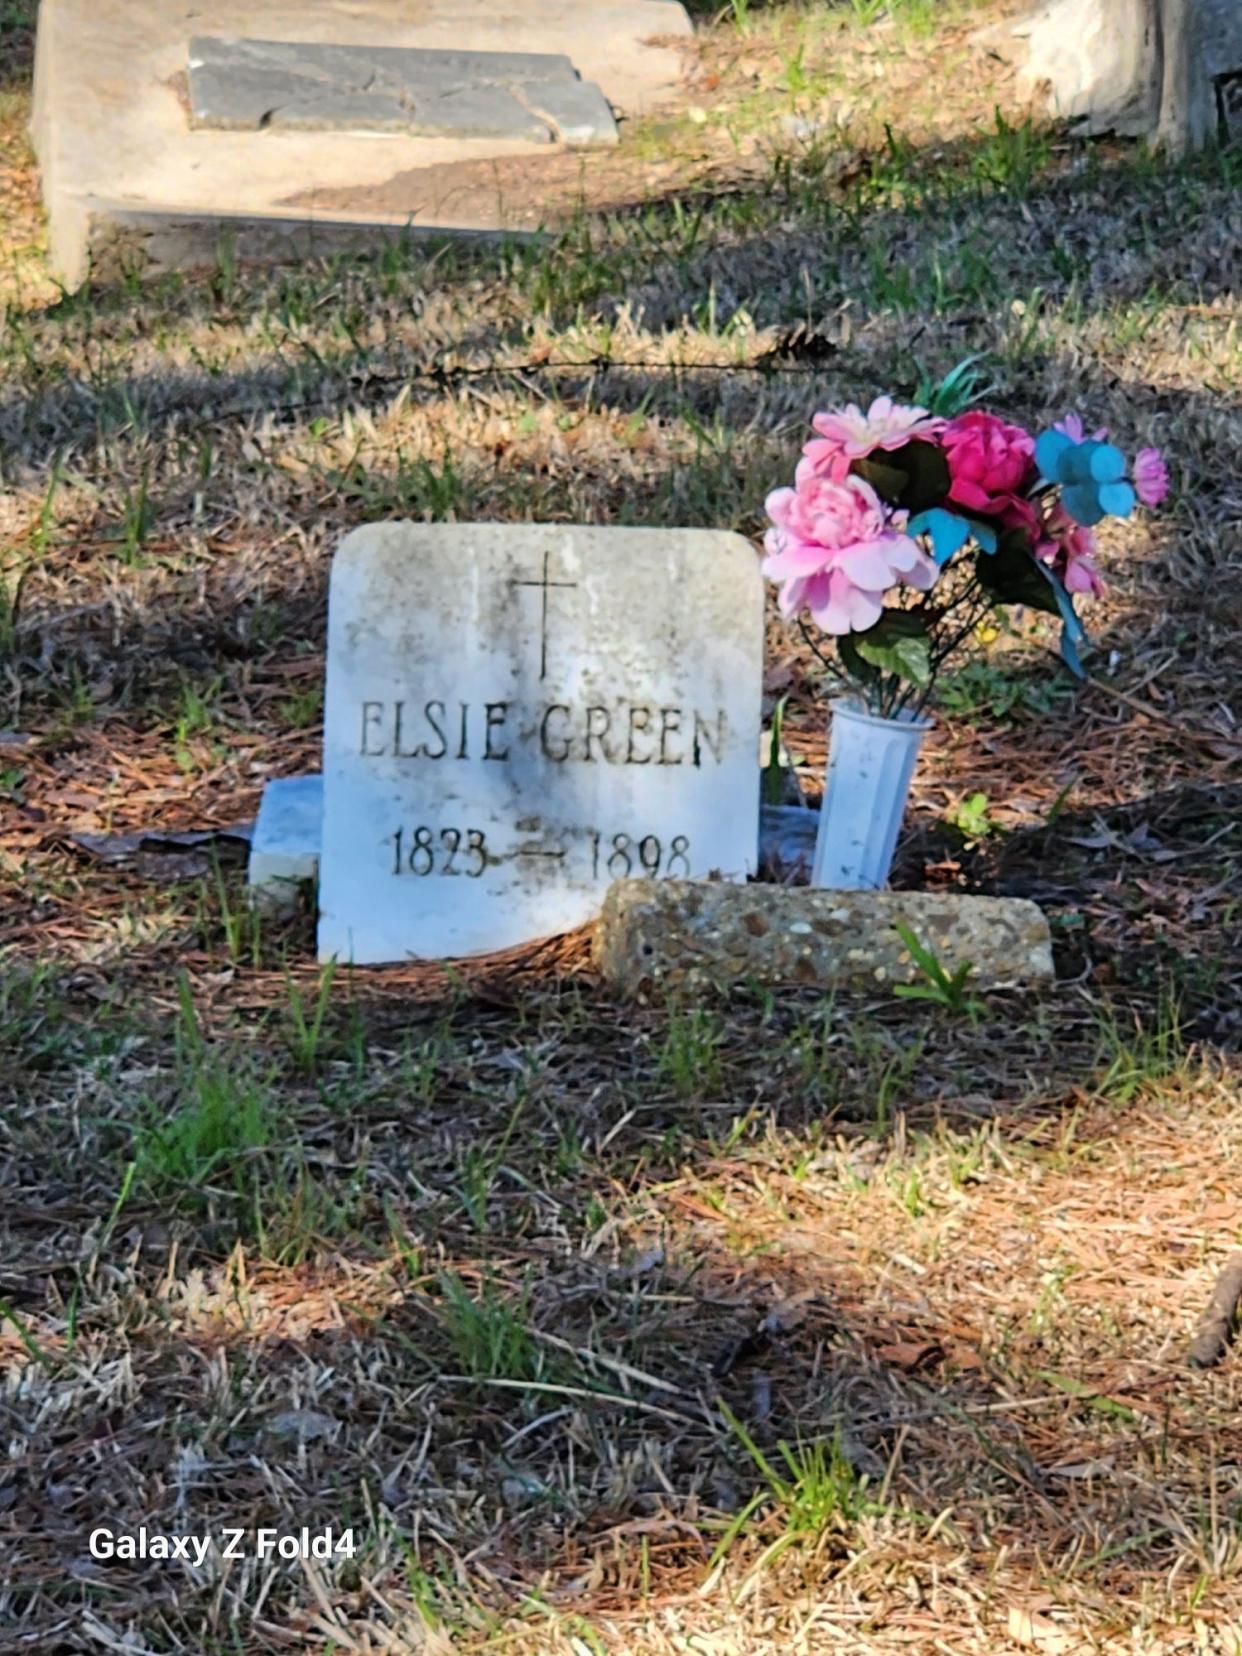 Elsie Green who was a slave is the great-great-great grandmother of Linda Rhodes. Green is buried in First Union Baptist Church Cemetery in Pineville. “She was a slave that ran away with a white man’s son. His father gave her to him,” Rhodes wrote in a text.